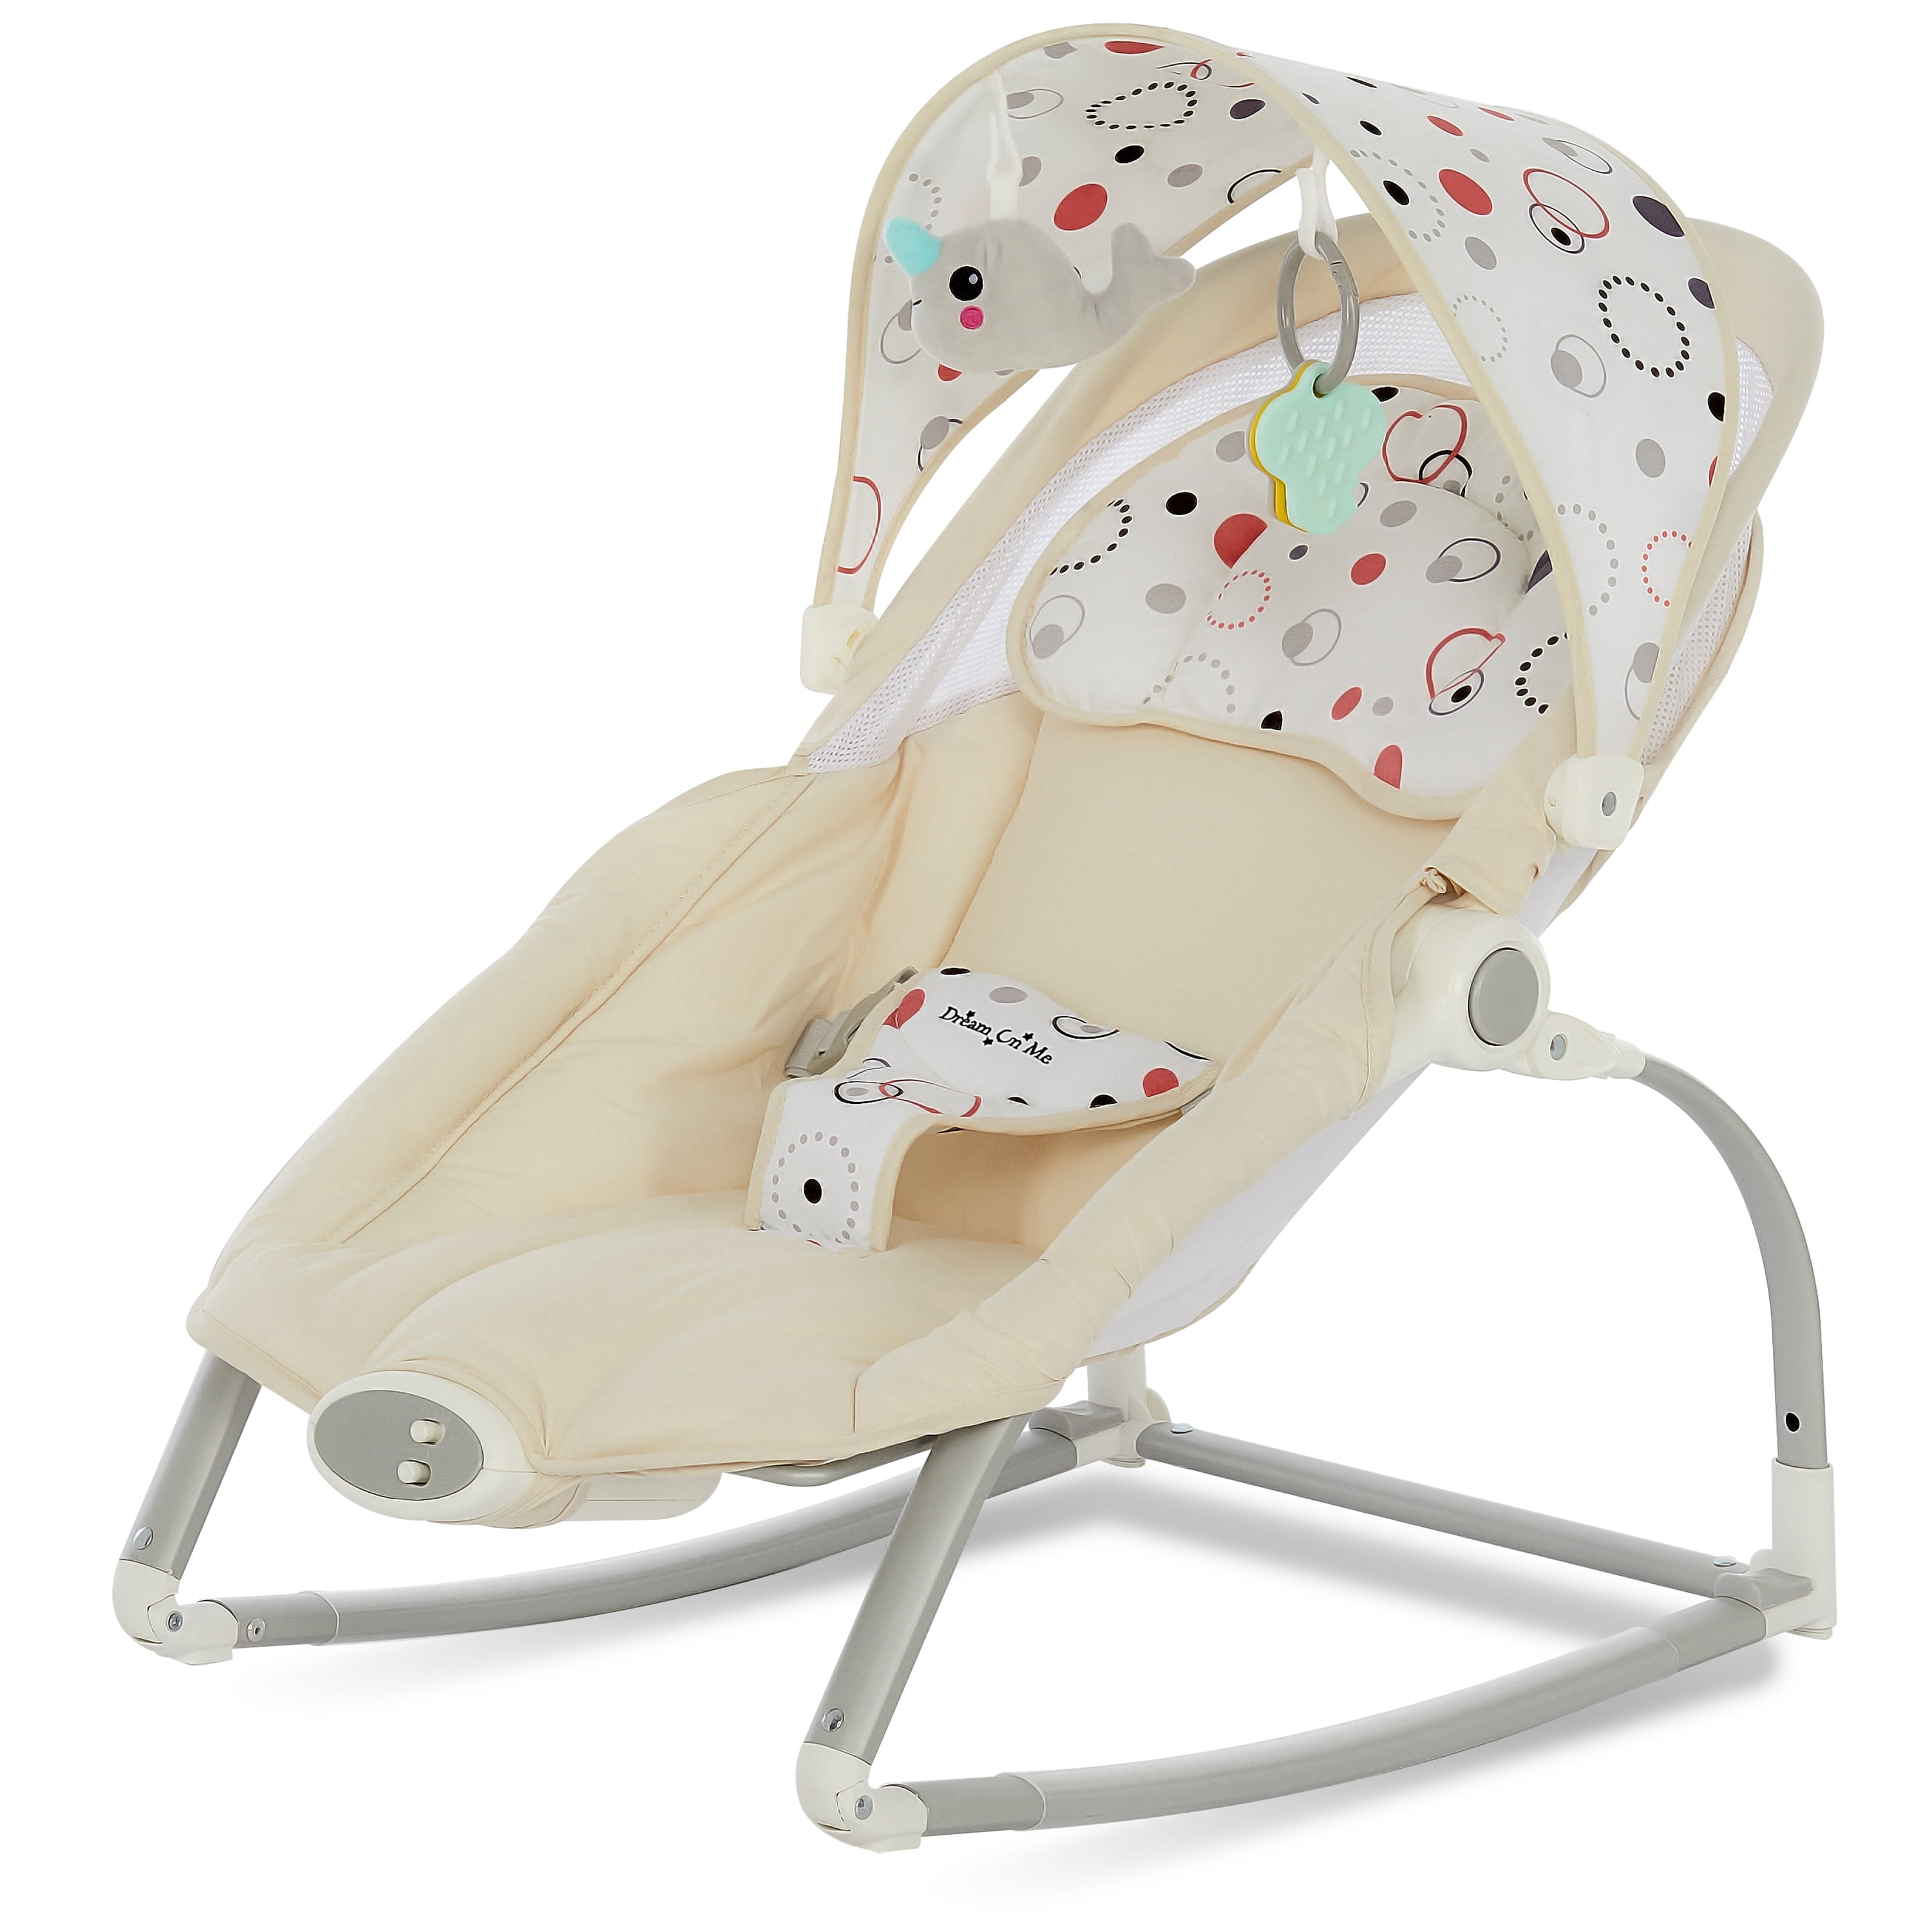 Dream On Me We Rock Infant Rocker II, Perfect to calm baby, Comfy Nap Time  in White